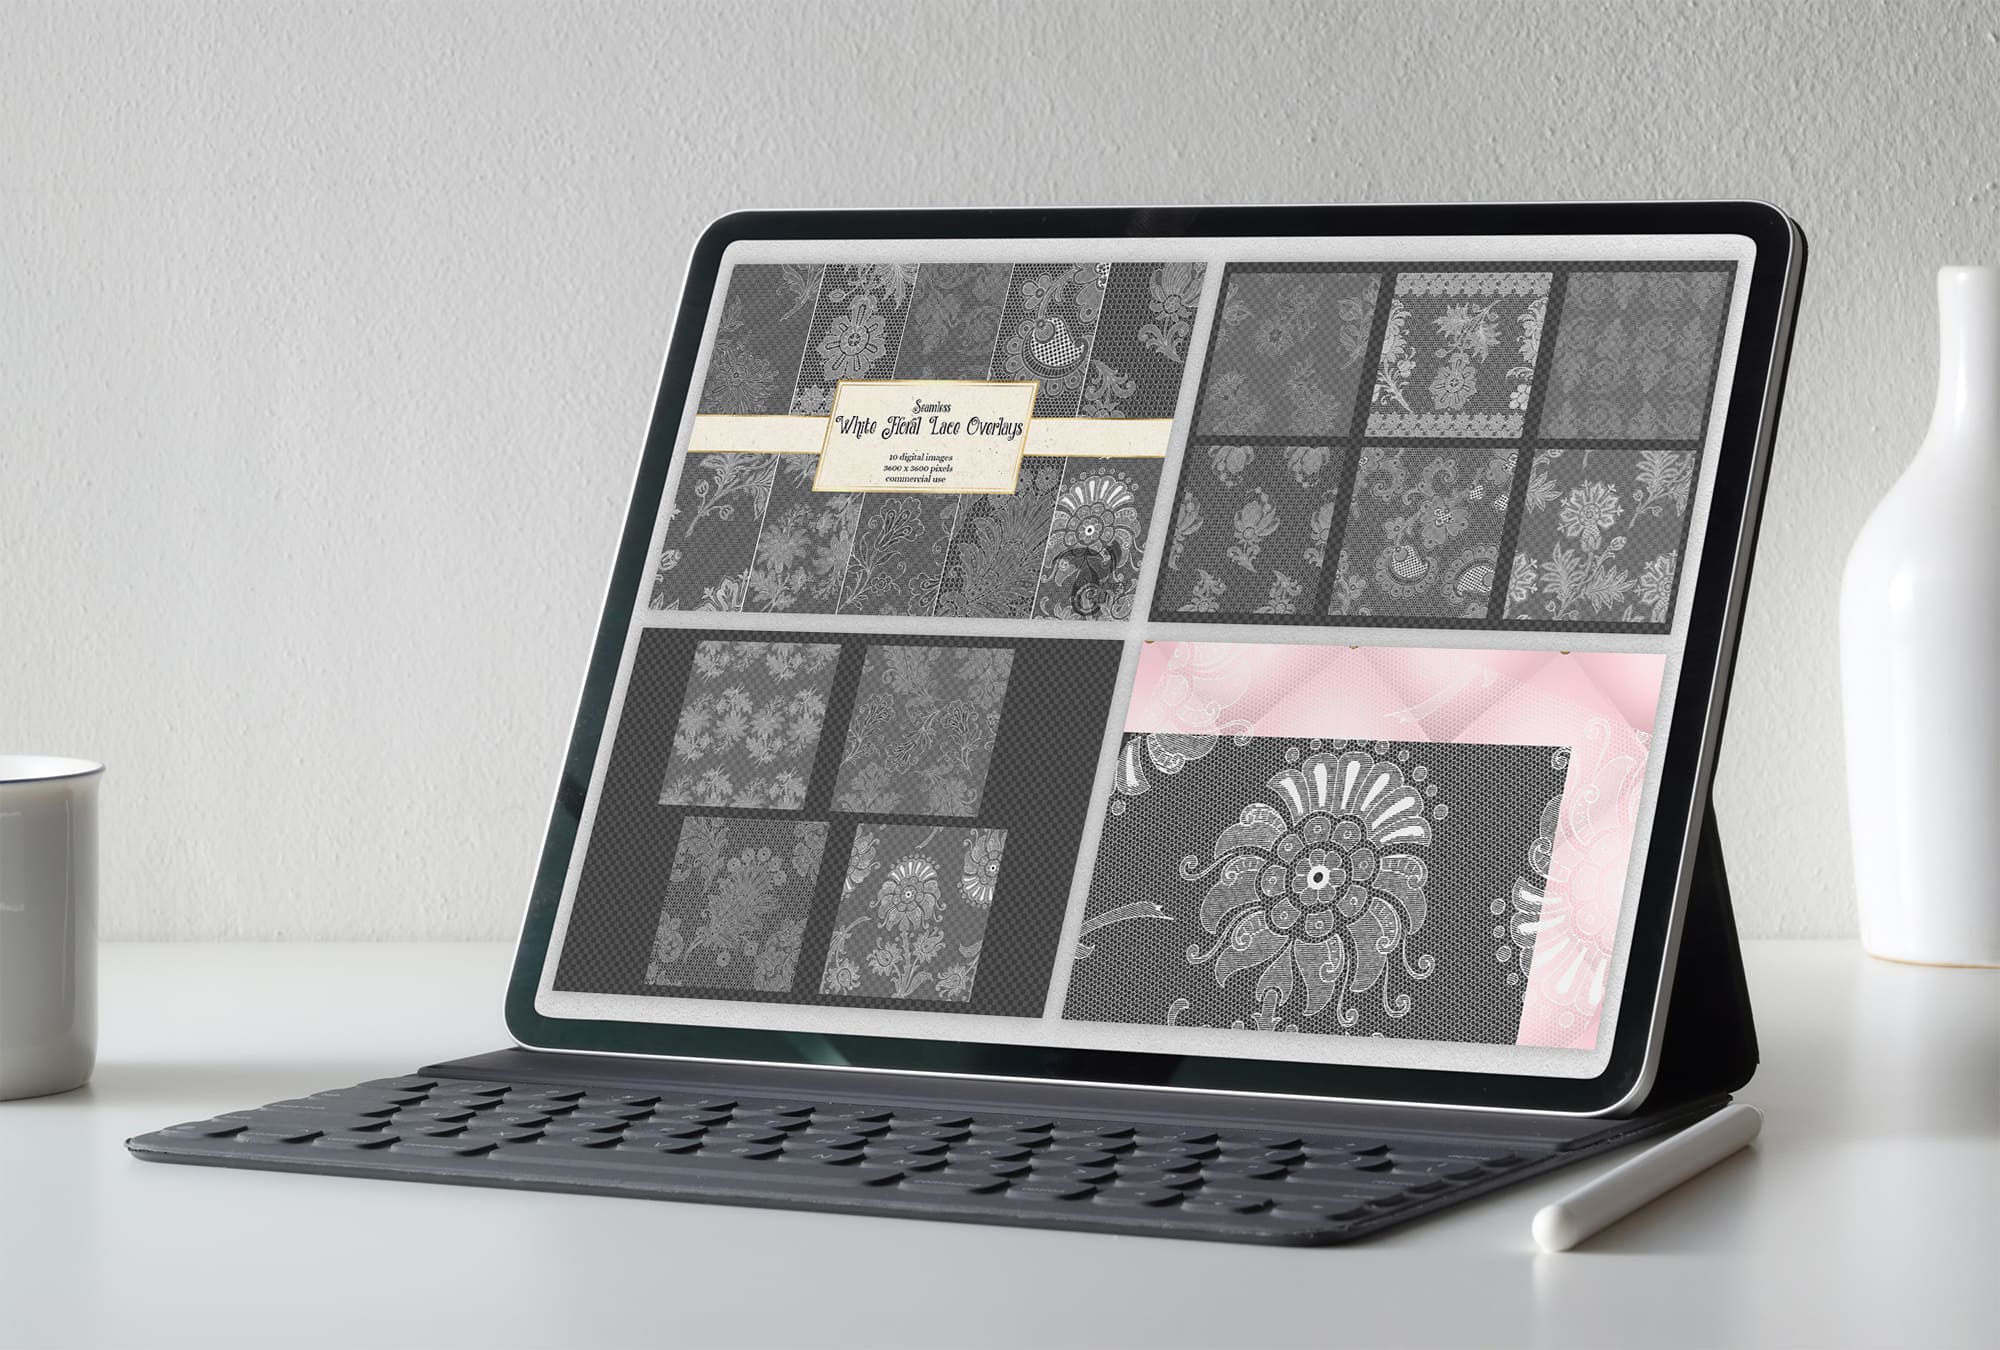 White Floral Lace Overlays on the IPad Mockup.